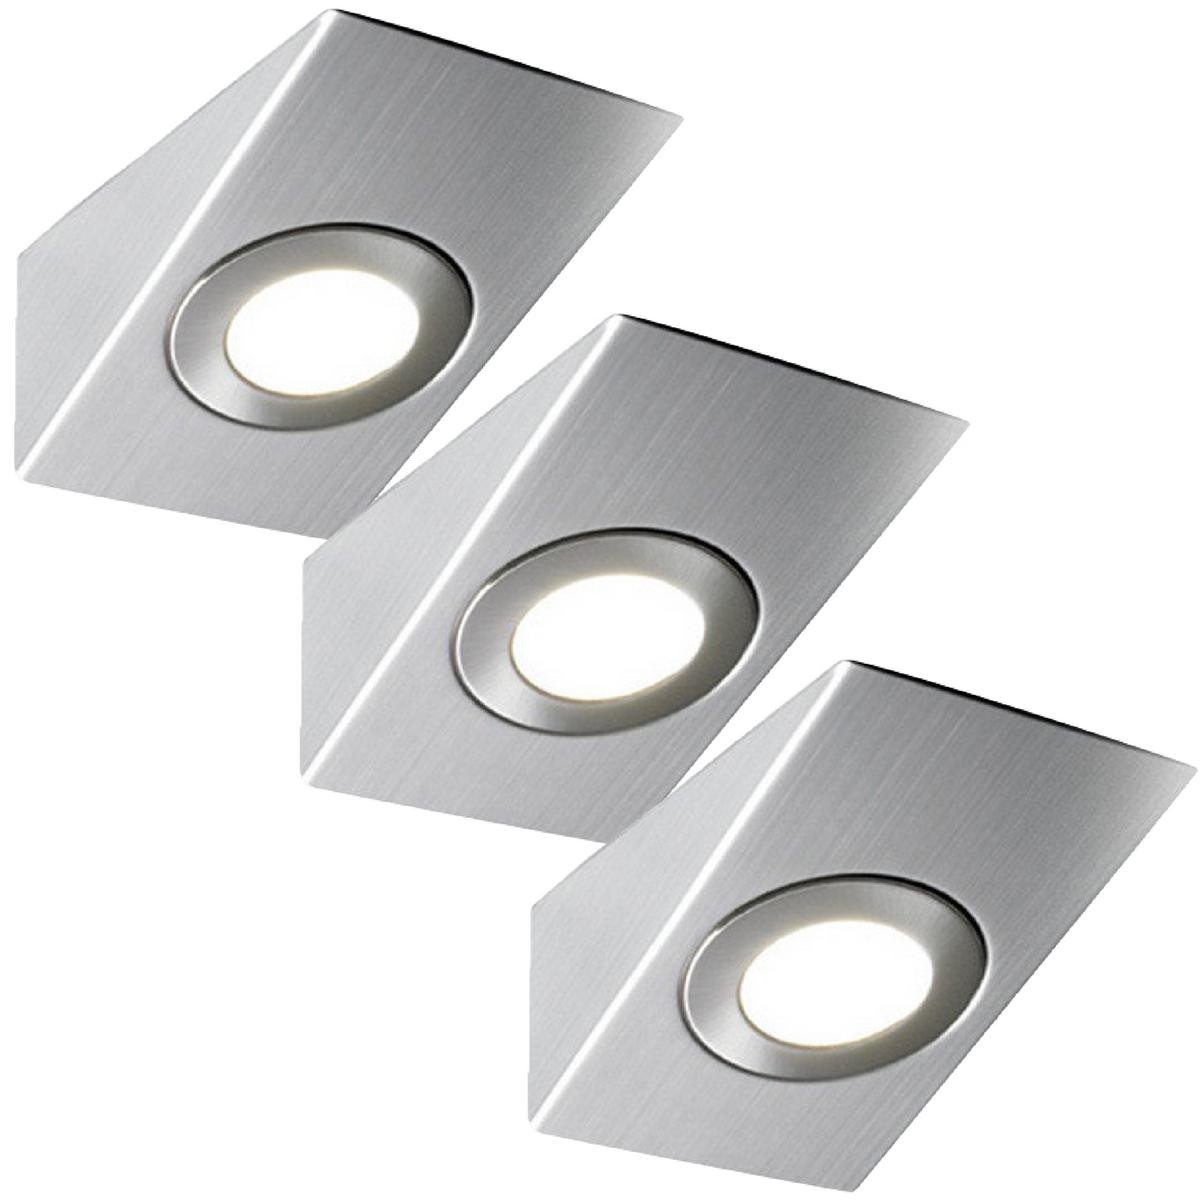 View 3 Pack Of Wedge Shaped LED Under Cabinet Lights With A 8W Driver information